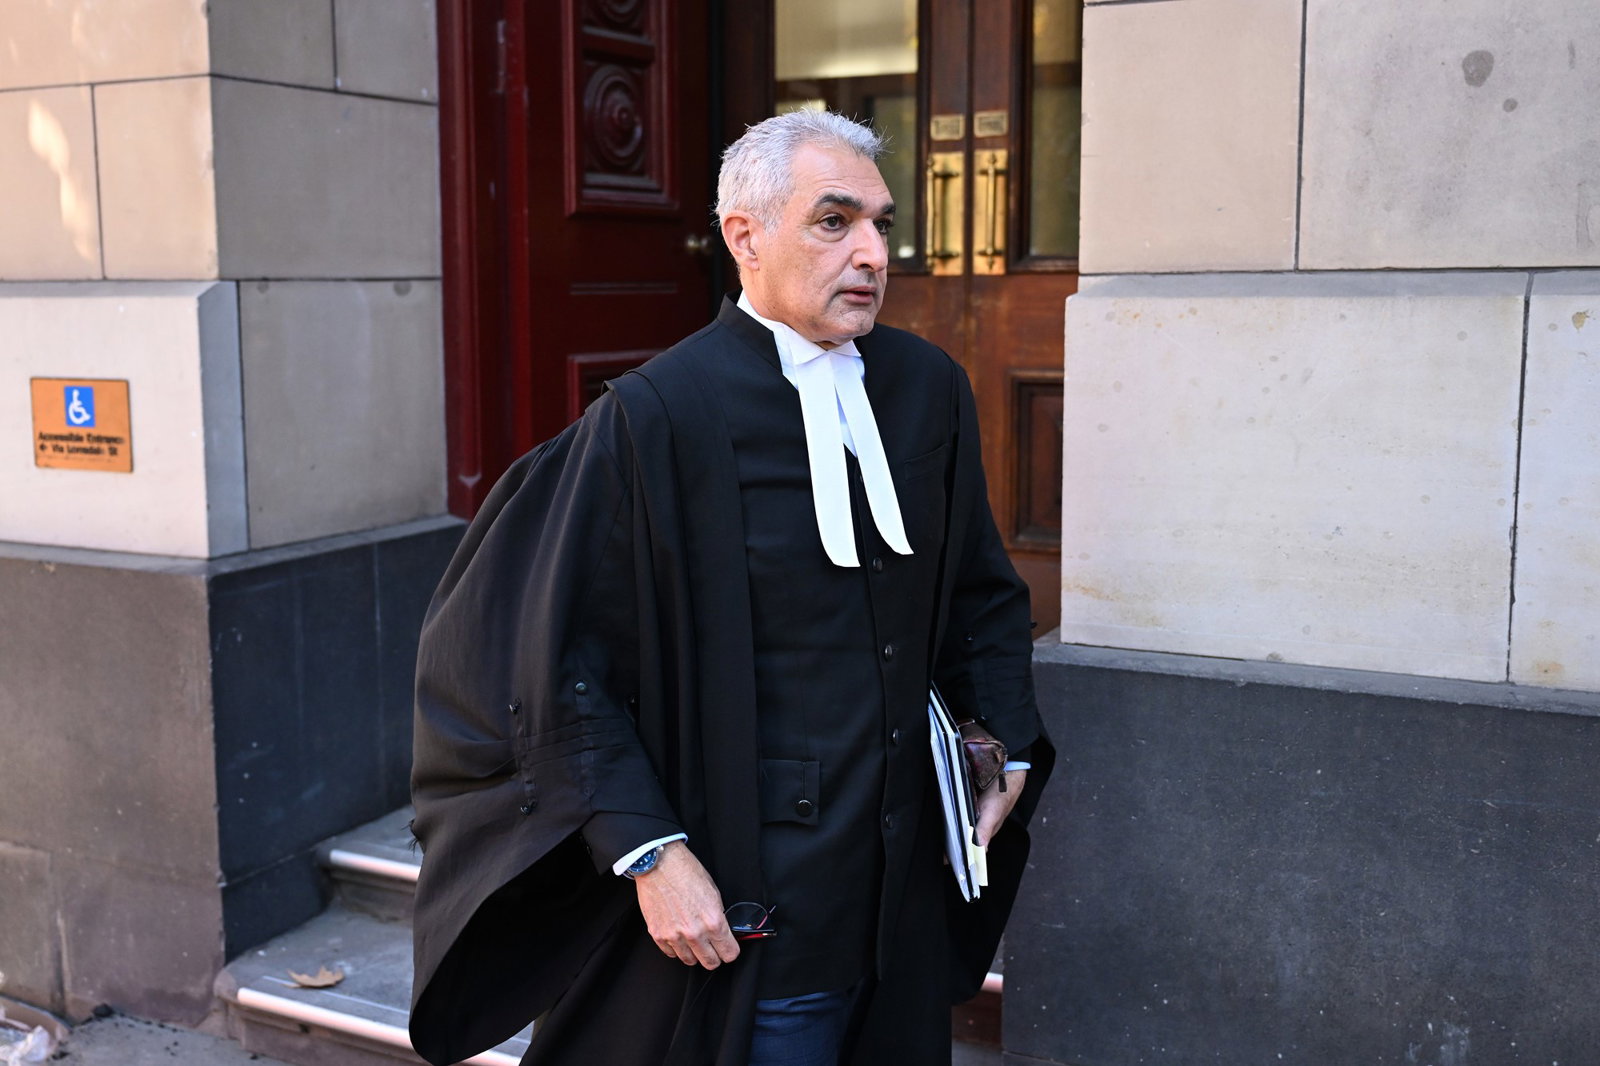 A lawyer in a robe